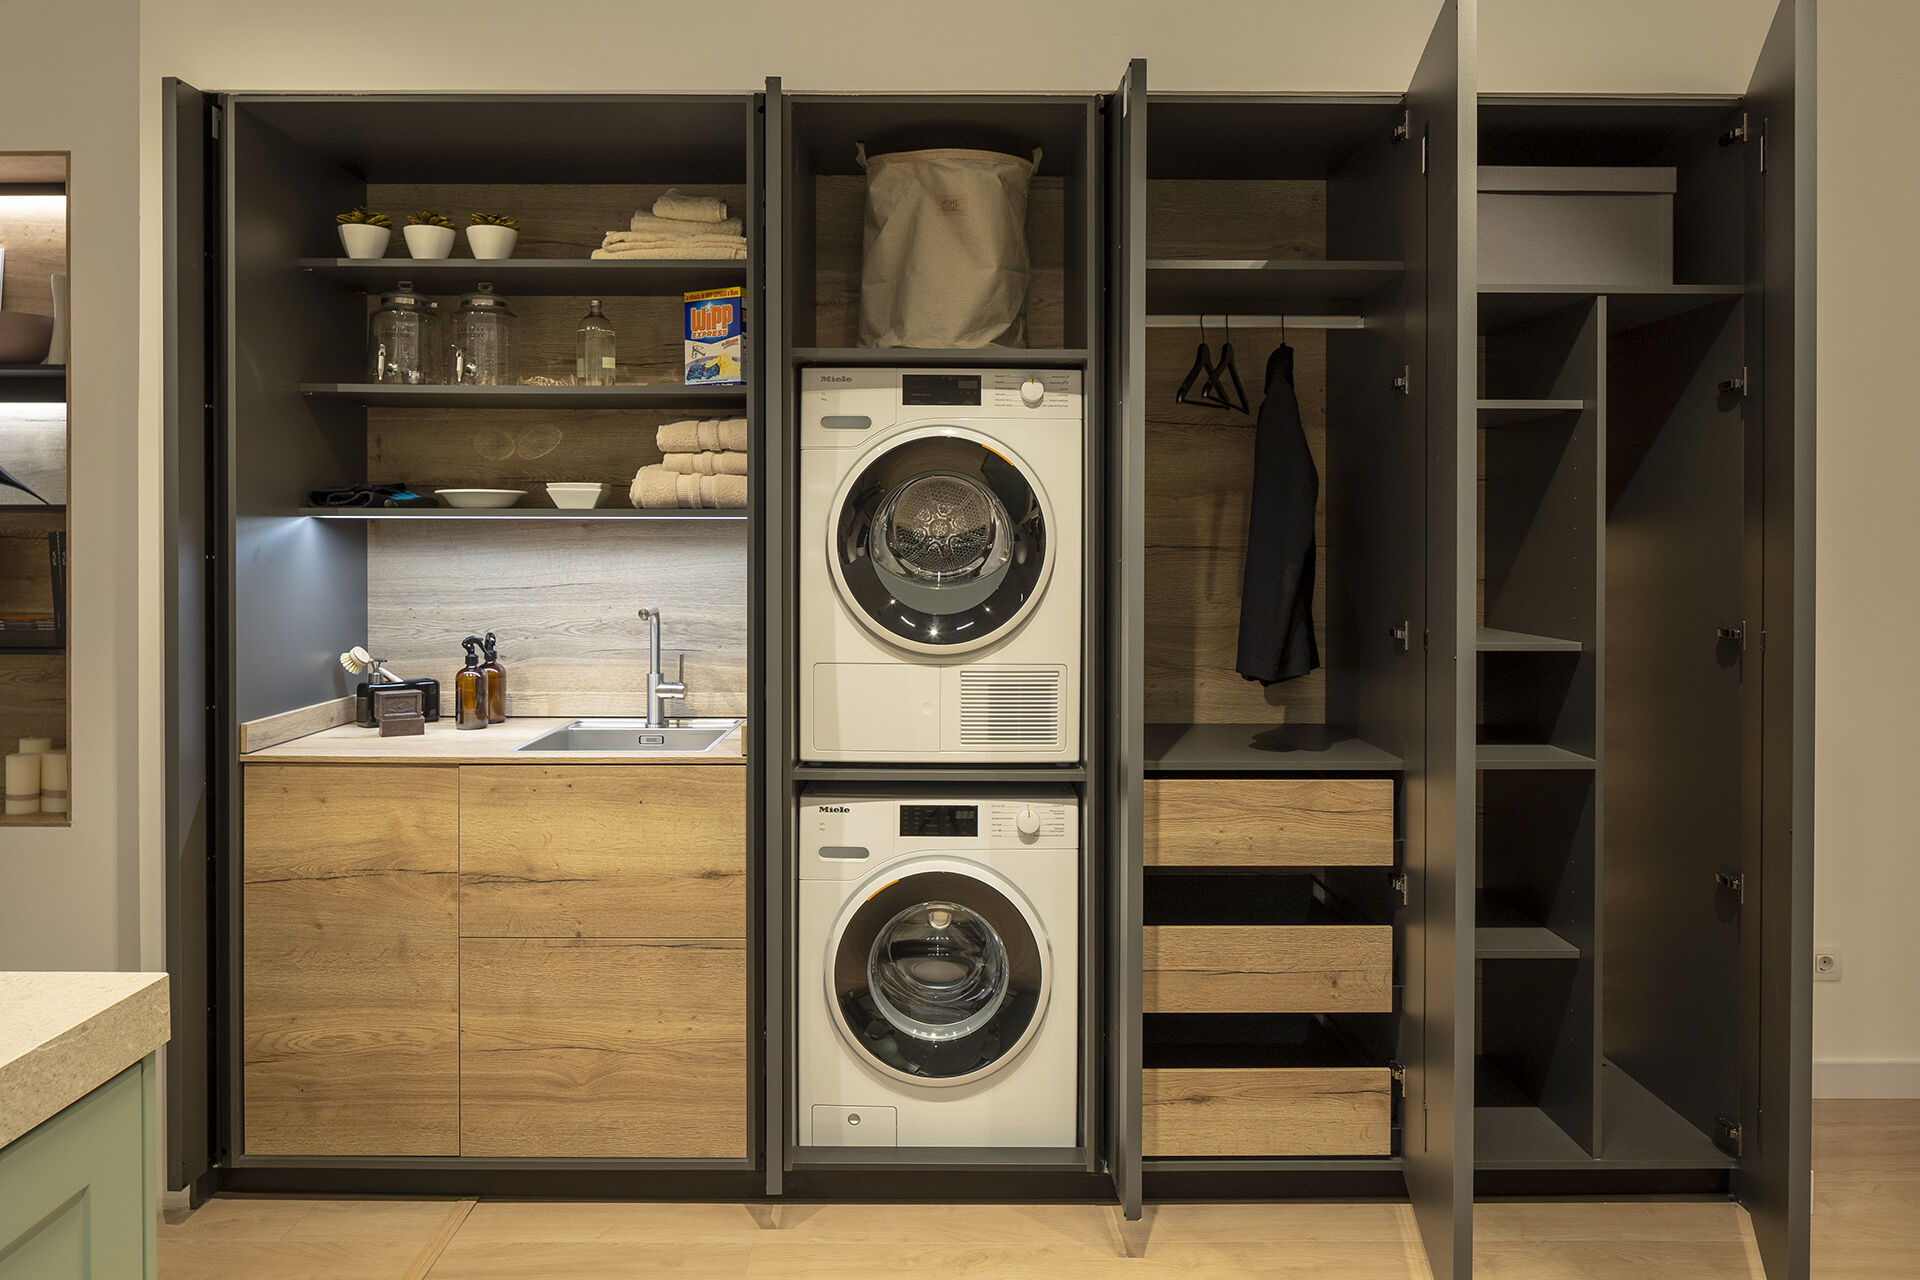 Units for washer, dryer and laundry